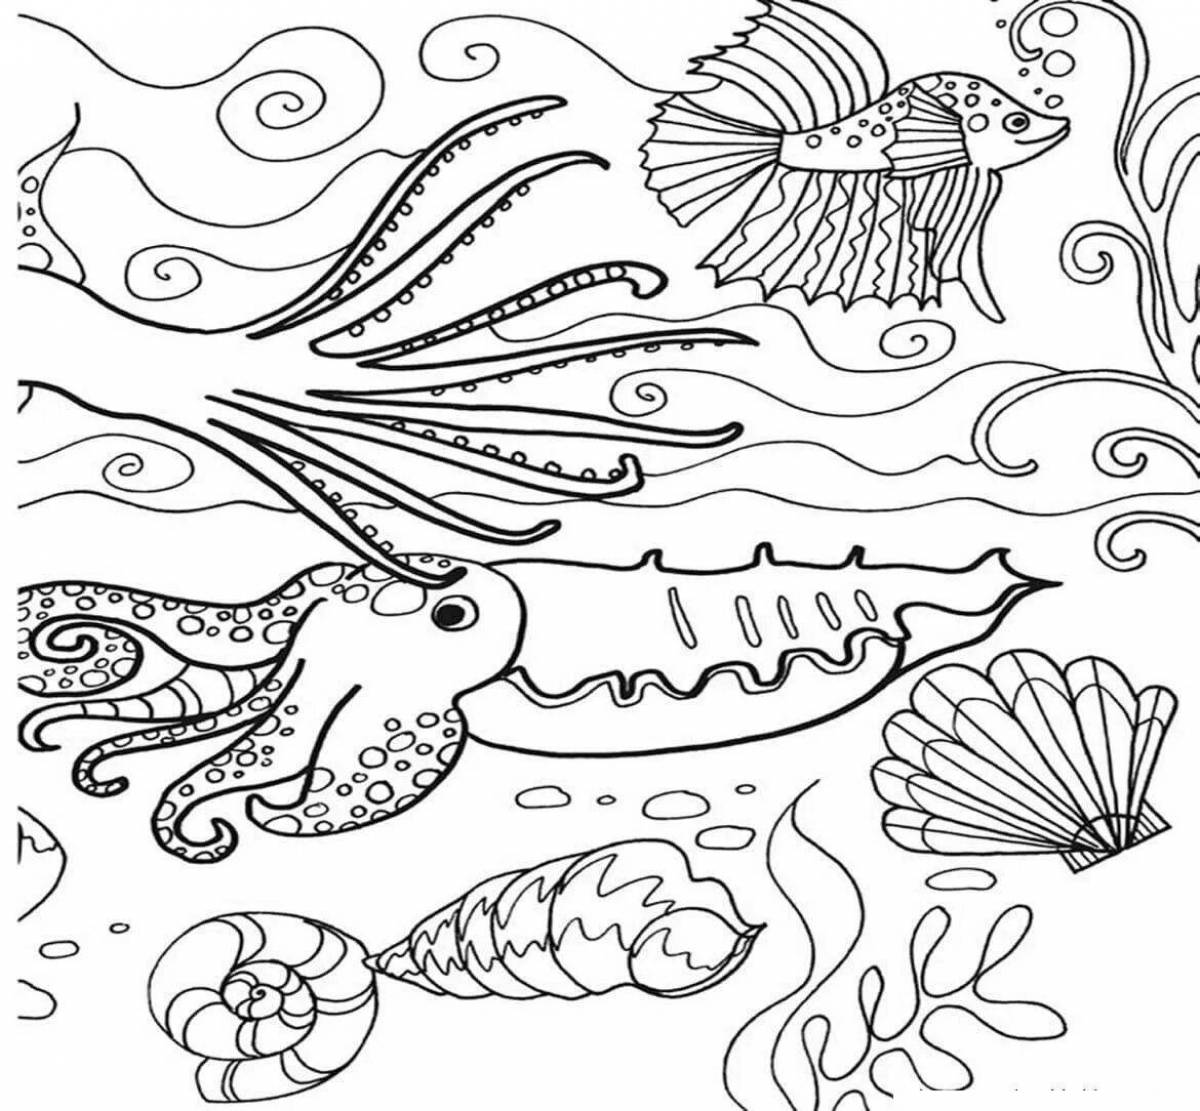 Glorious sea world coloring page